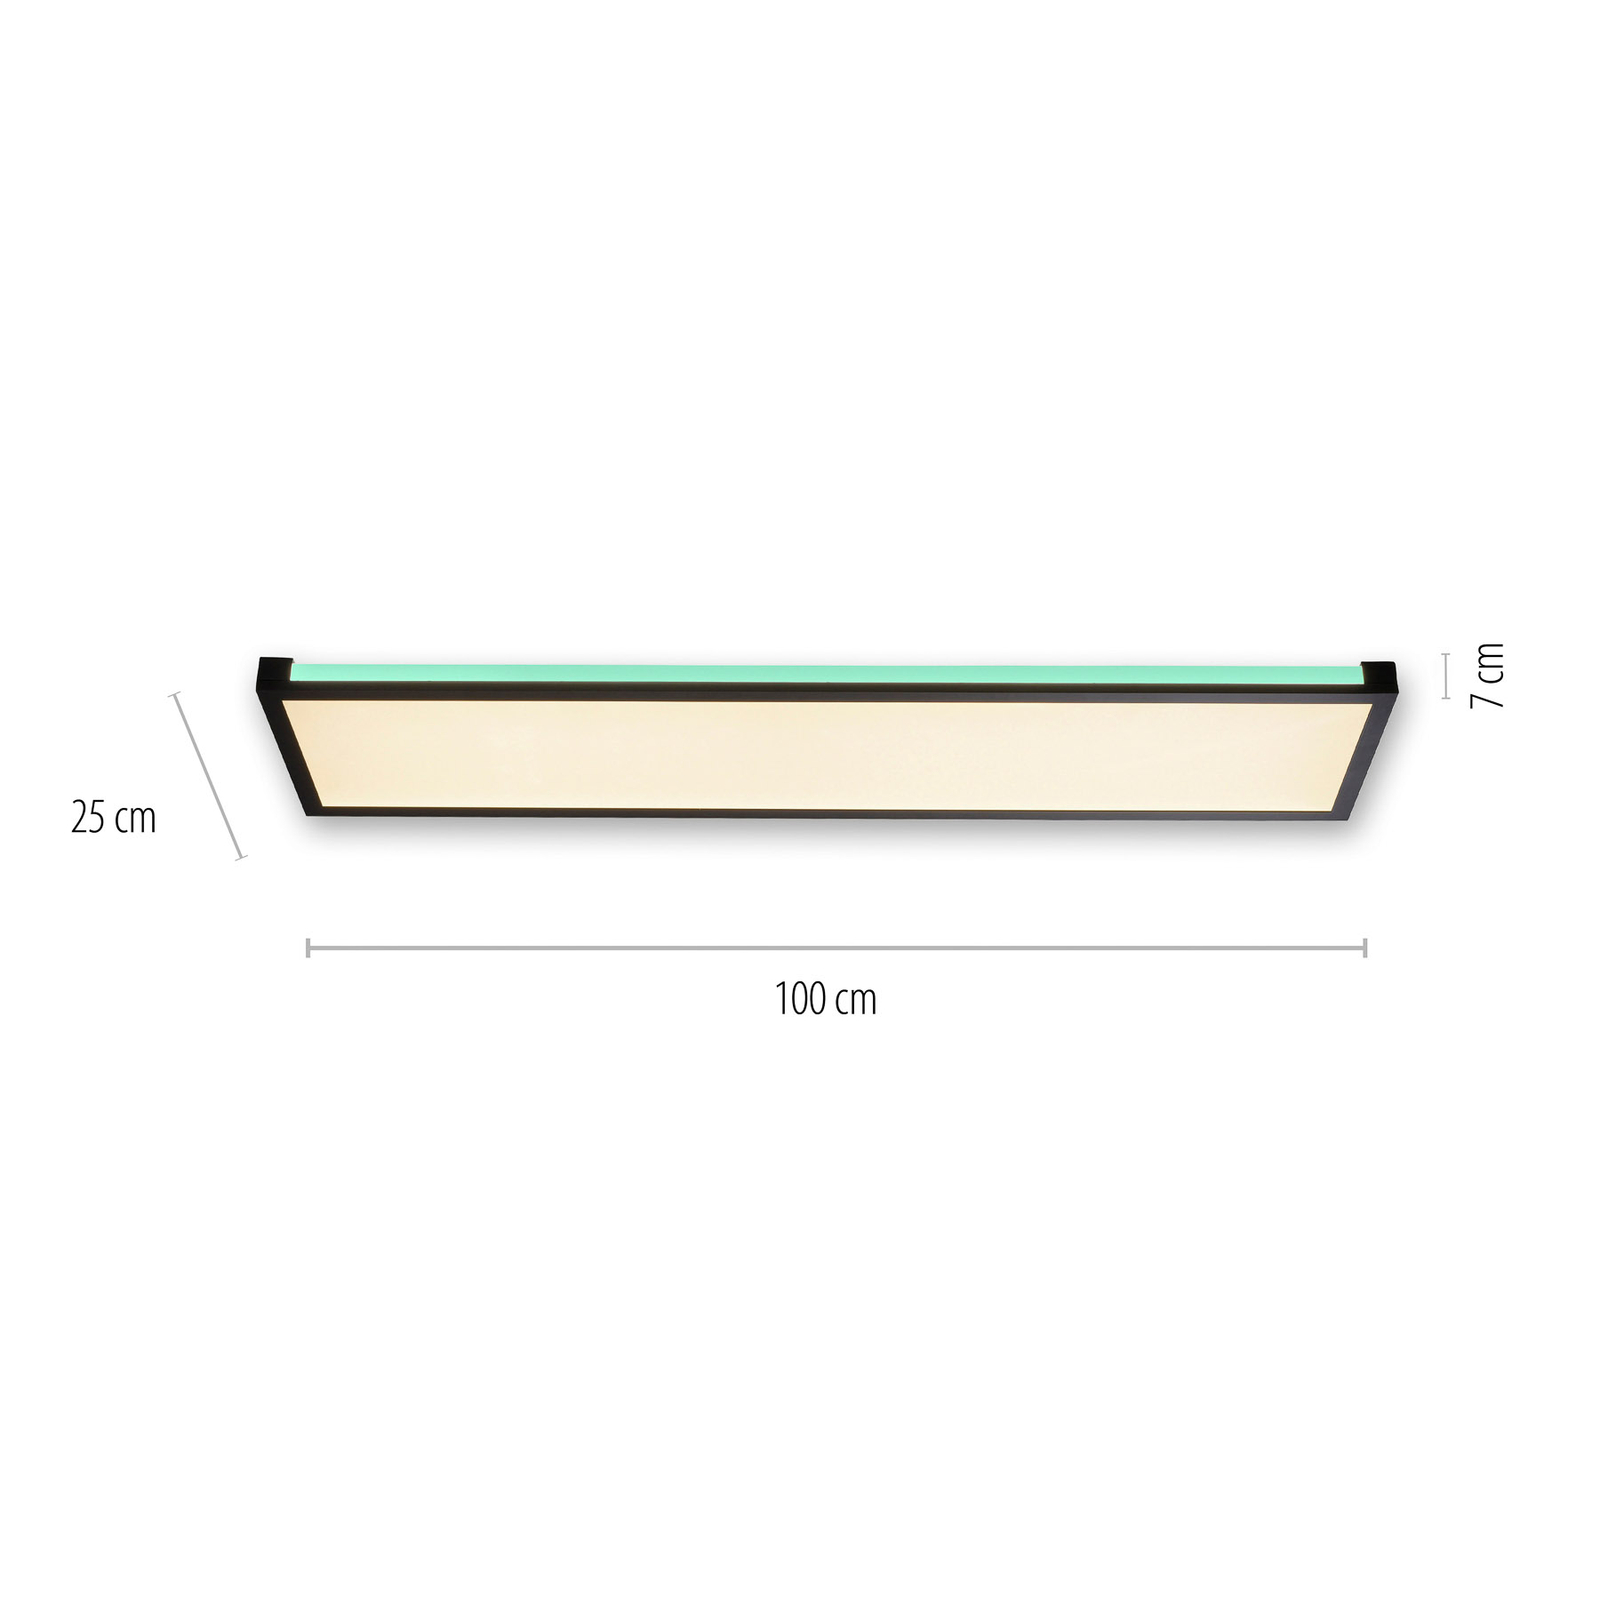 Mario LED ceiling lamp 100 x 25 cm, dimmable, RGBW